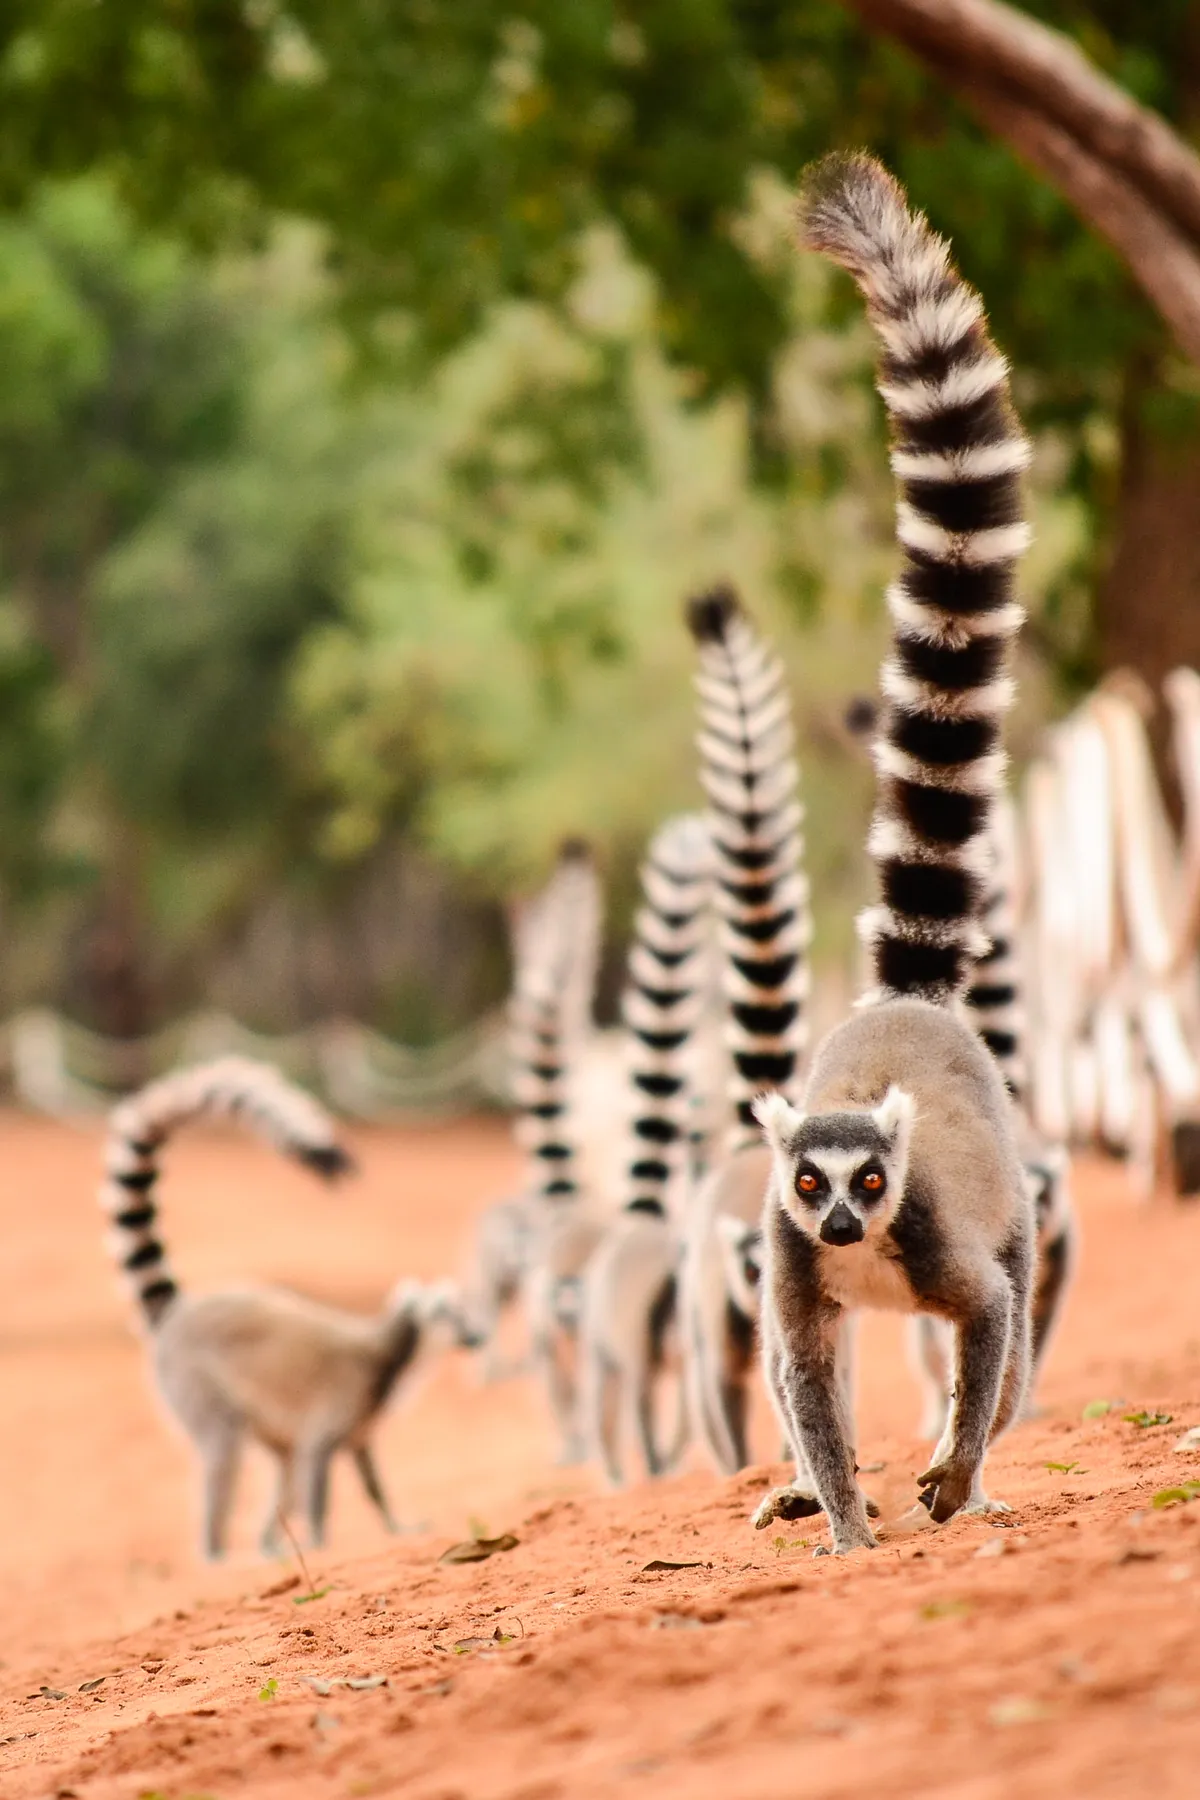 Family of ring-tailed lemurs in Berenty reserve, Madagascar. © Getty